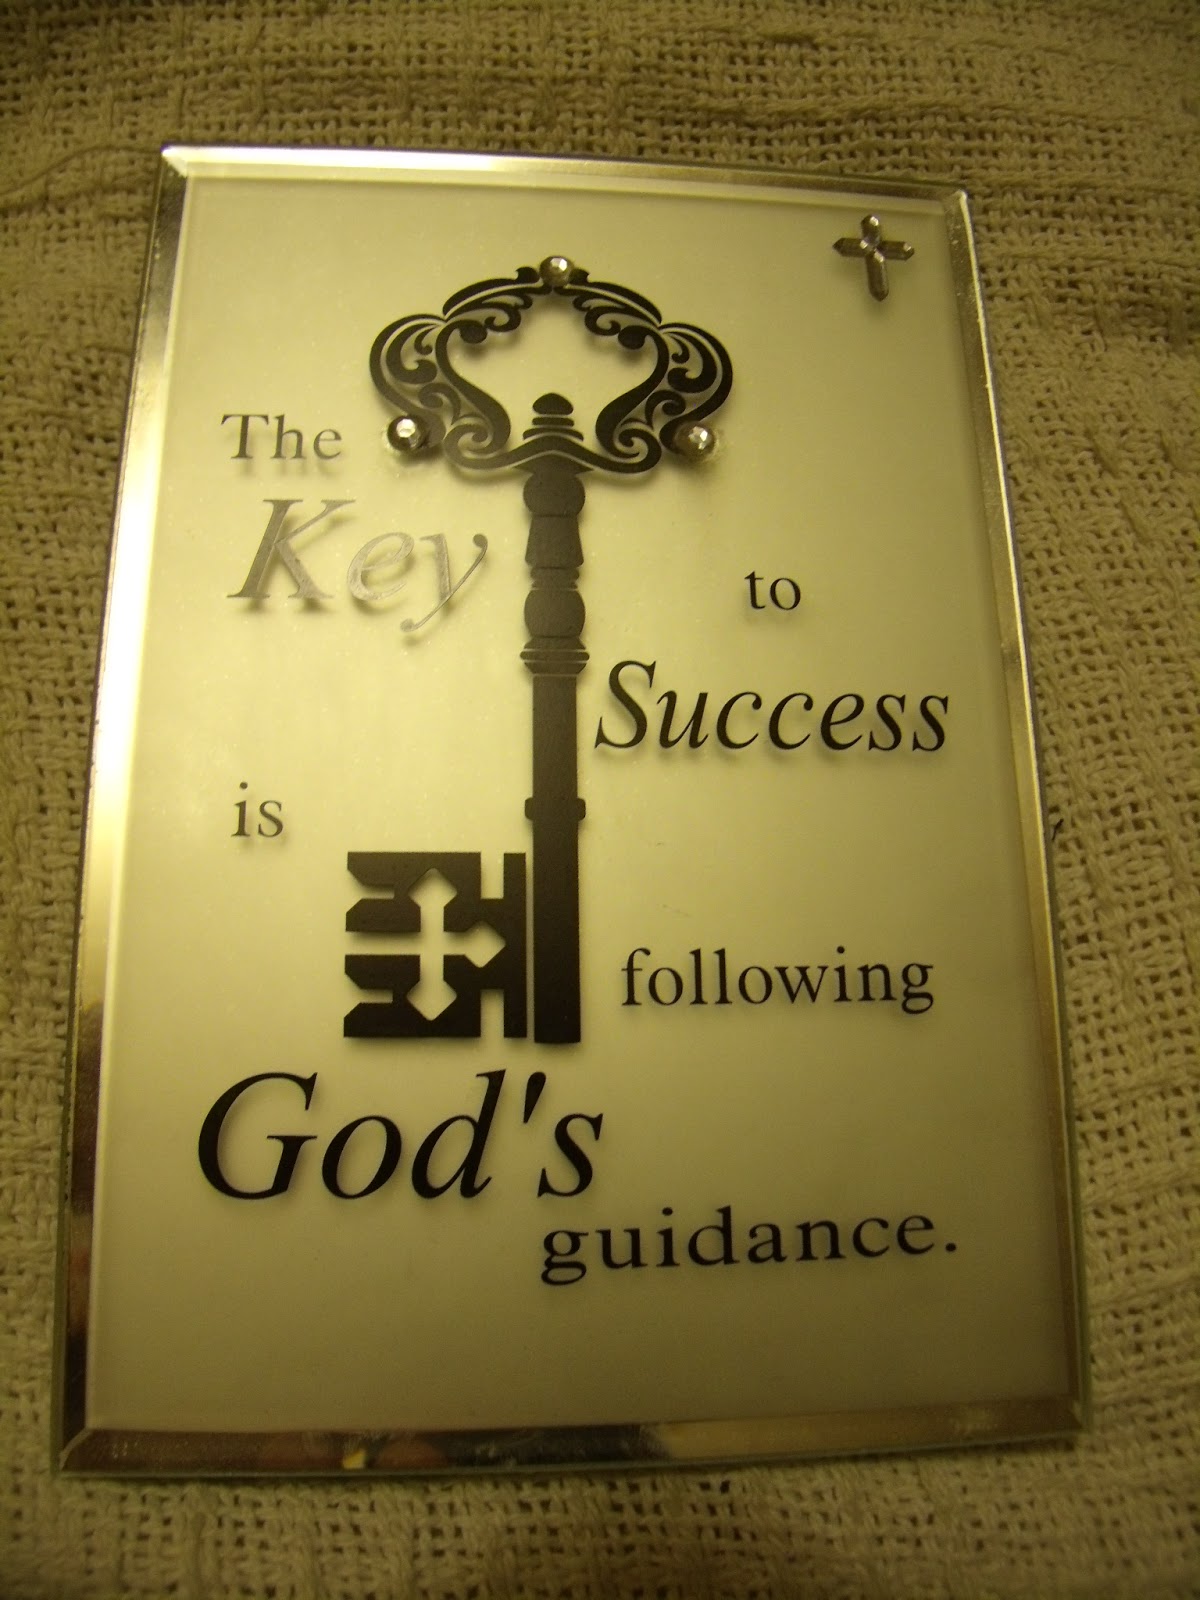 This photo is of a plaque I purchased for $2 at a Family Dollar store I think it nicely states the key to success Disclosure I work part time as a store